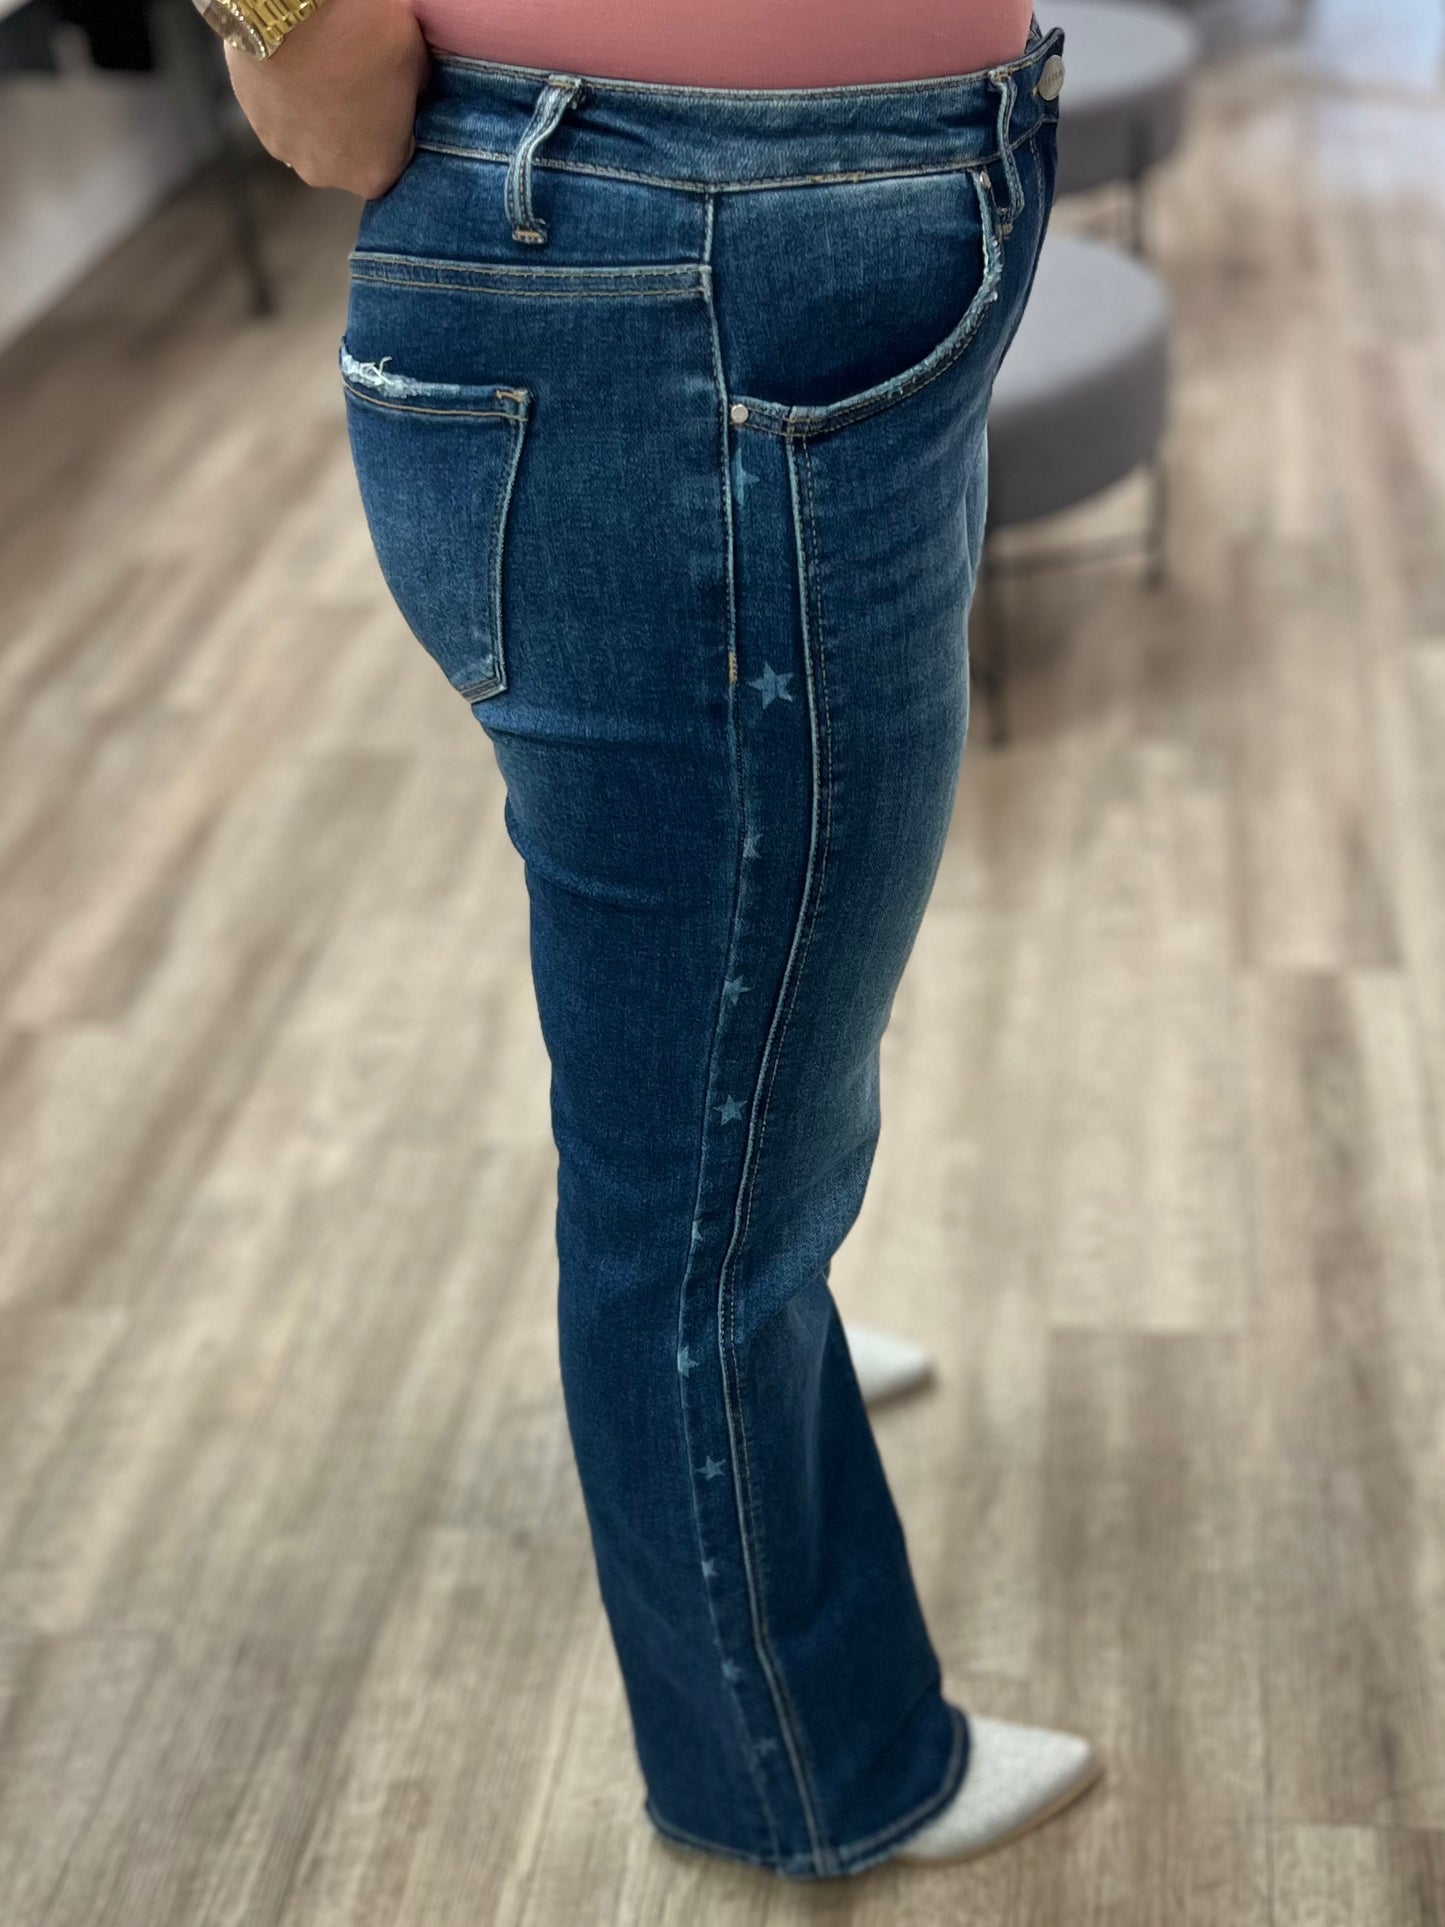 Rock Star Jeans in Mid Rise